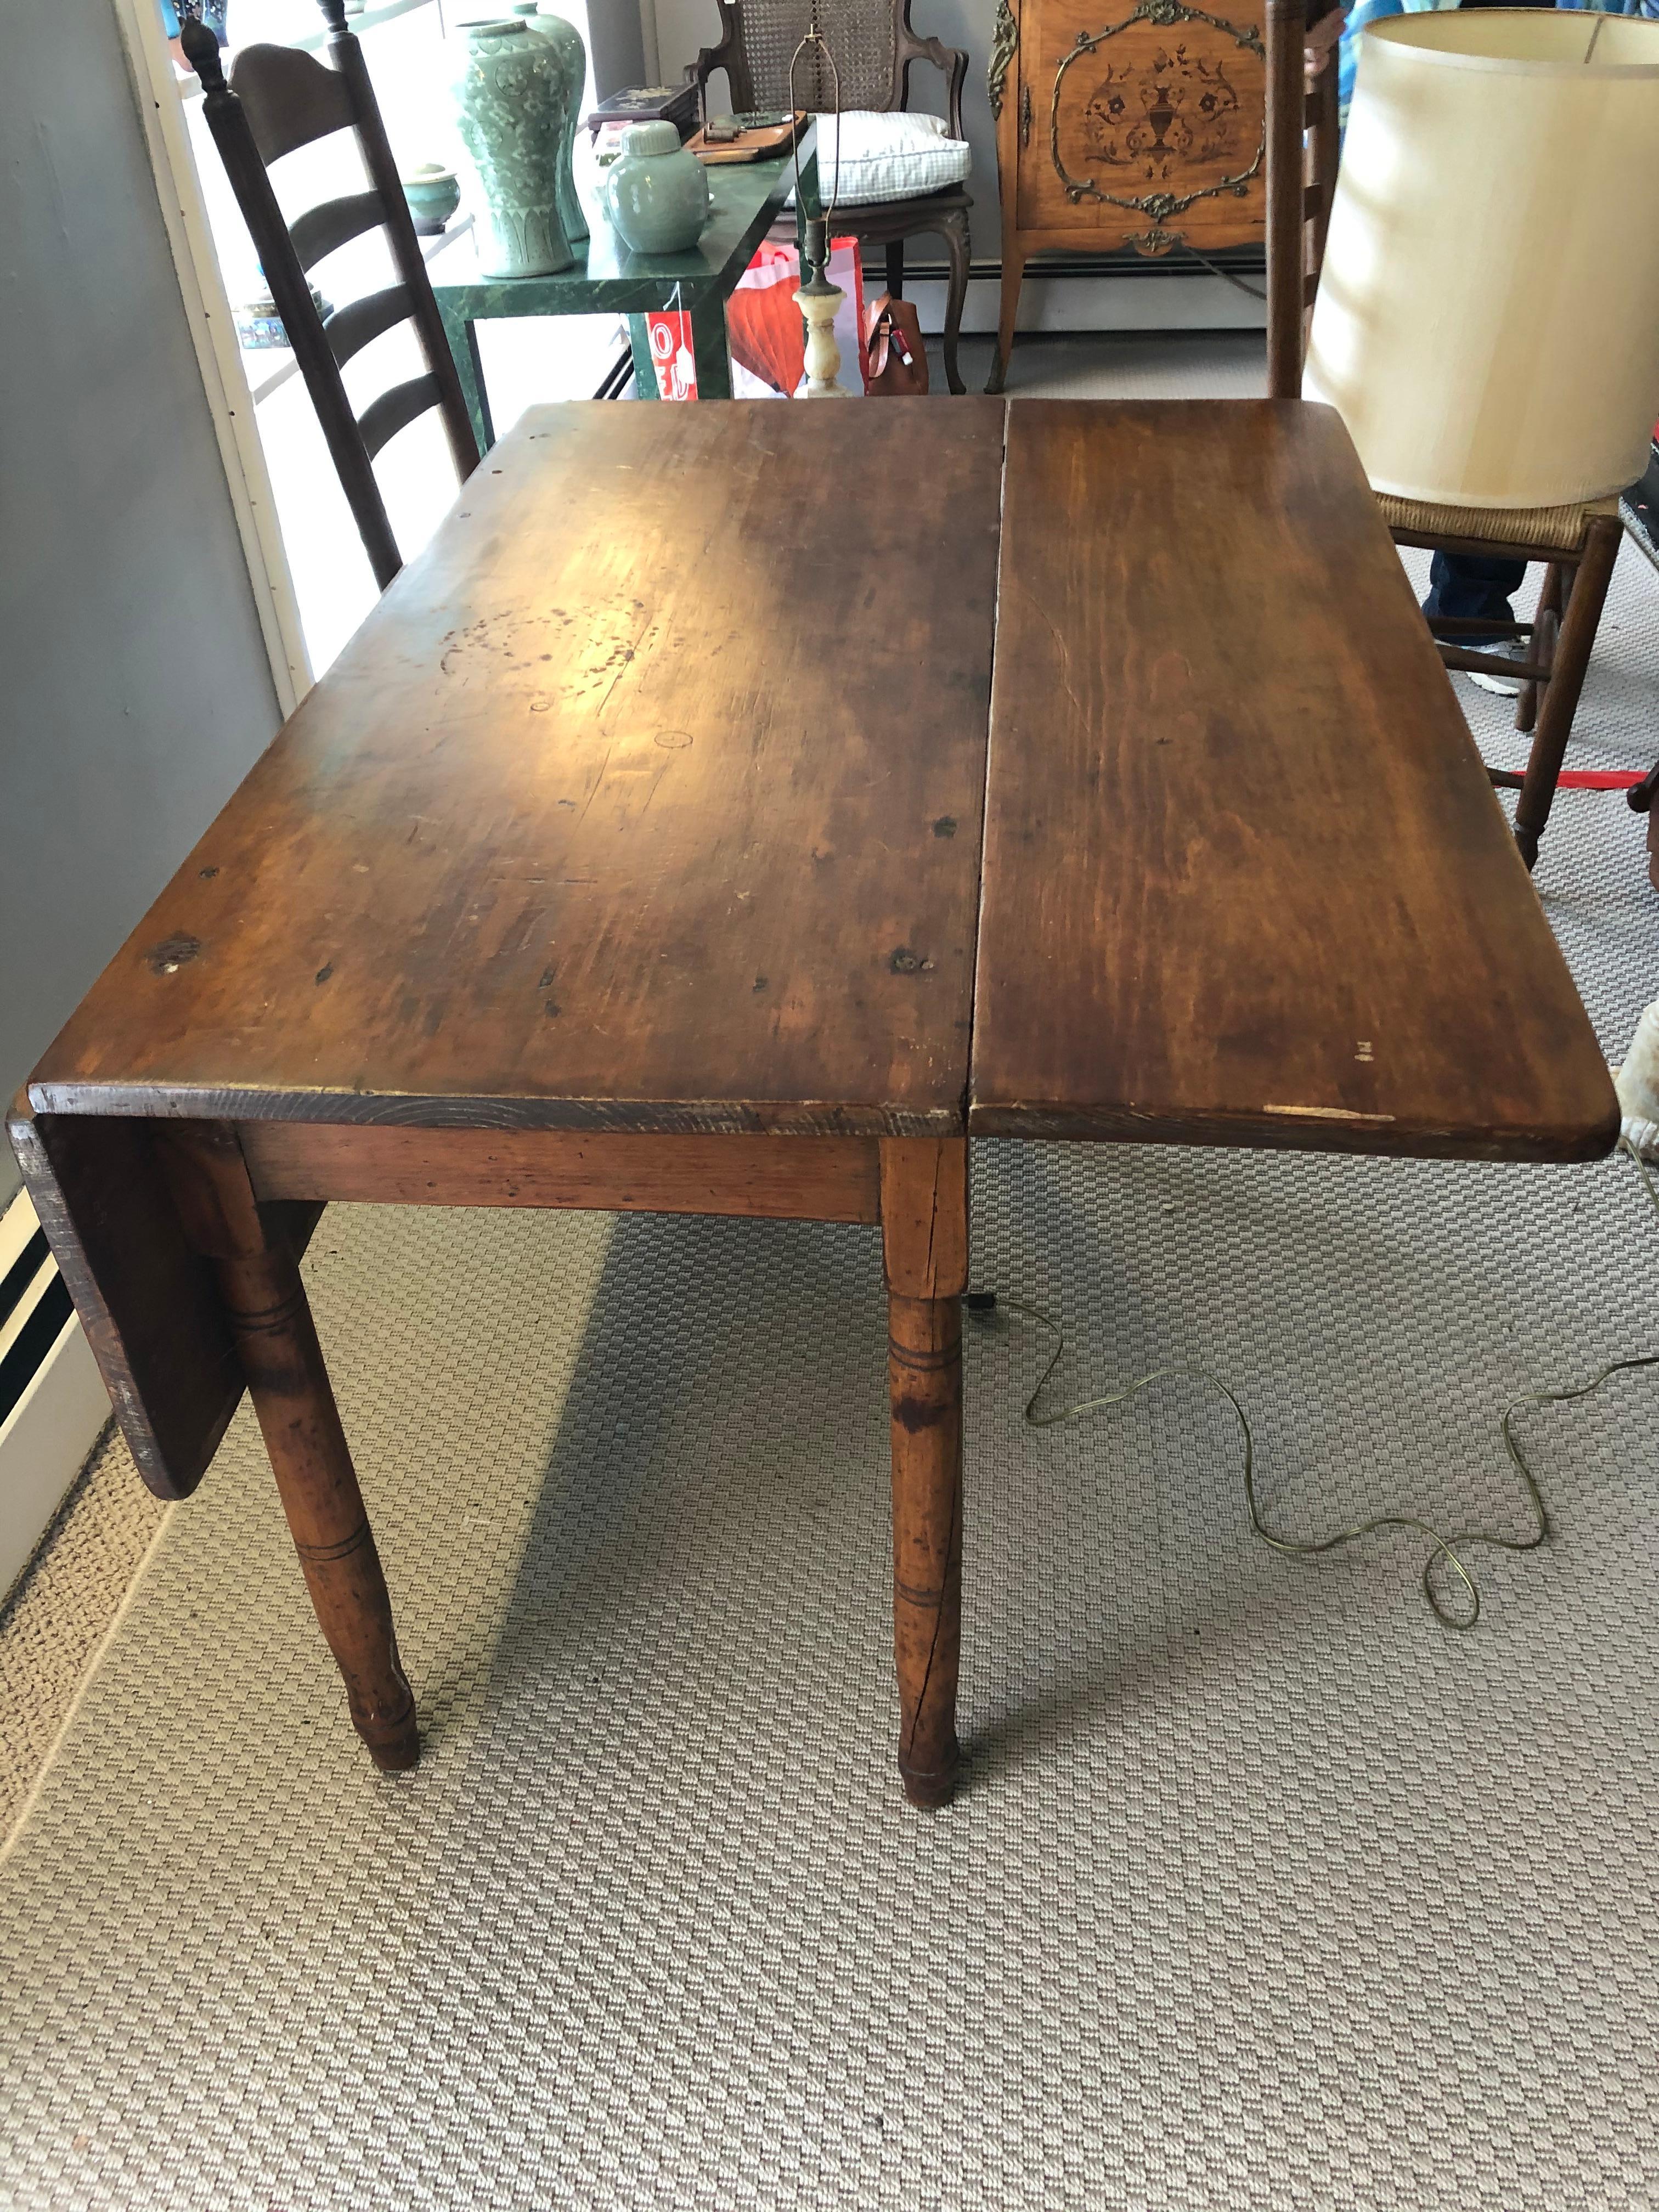 A 19th century primitive drop leaf Pembroke table having a rich aged patina and handsome turned legs. The table can serve as a small dining table when open or a side table when closed. 
Leaves are 11.5 D Open table is 40.75 x 42 x 28.25.